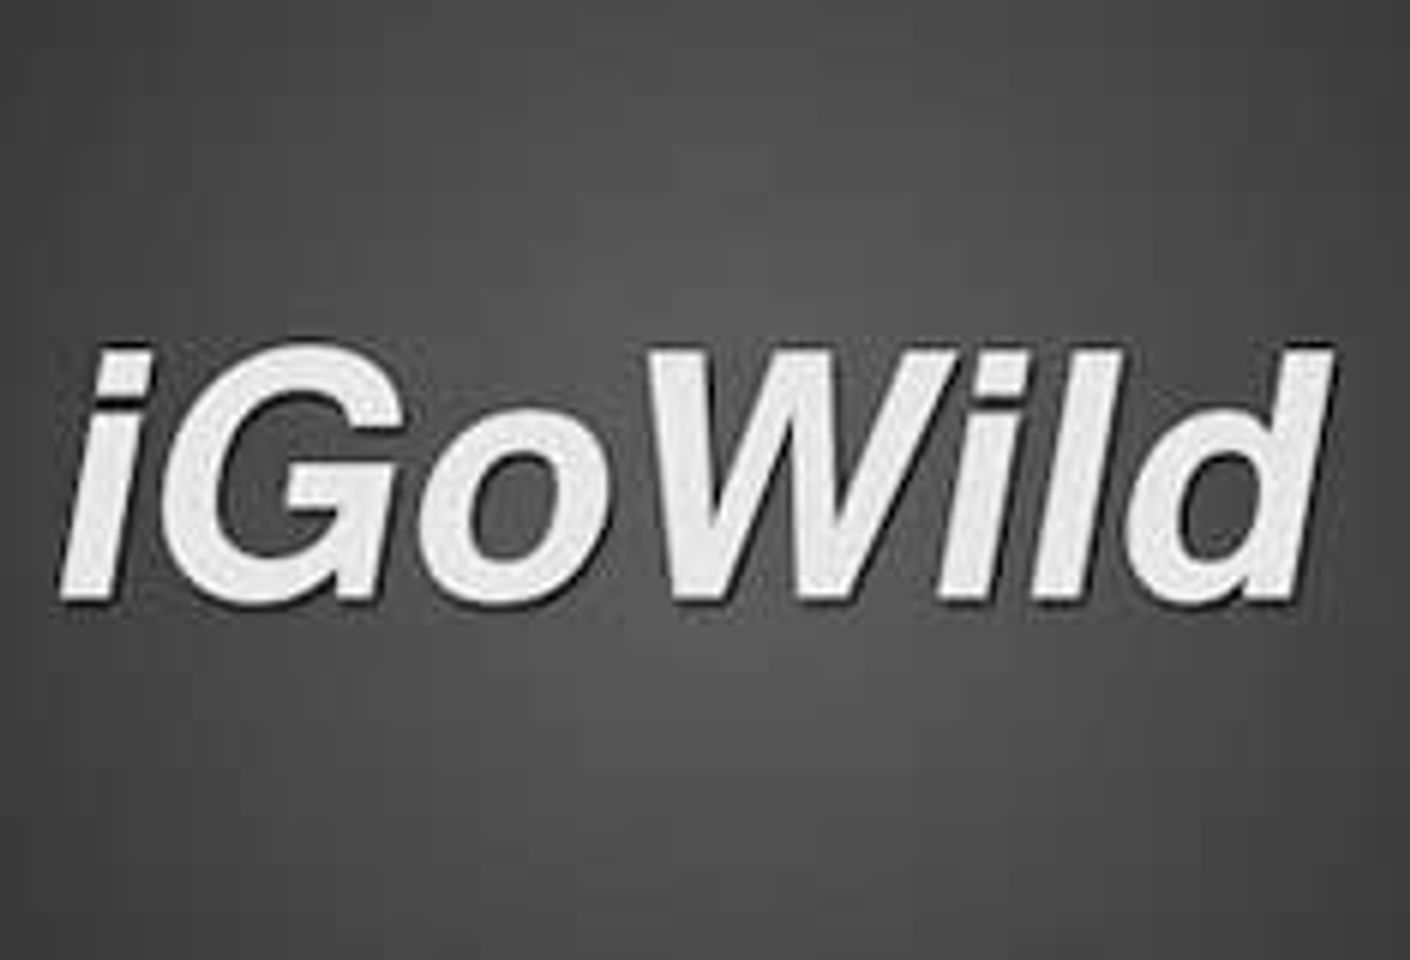 iGoWild Web-App Allows Uploading, Sharing of Nude Photos on iOS Devices